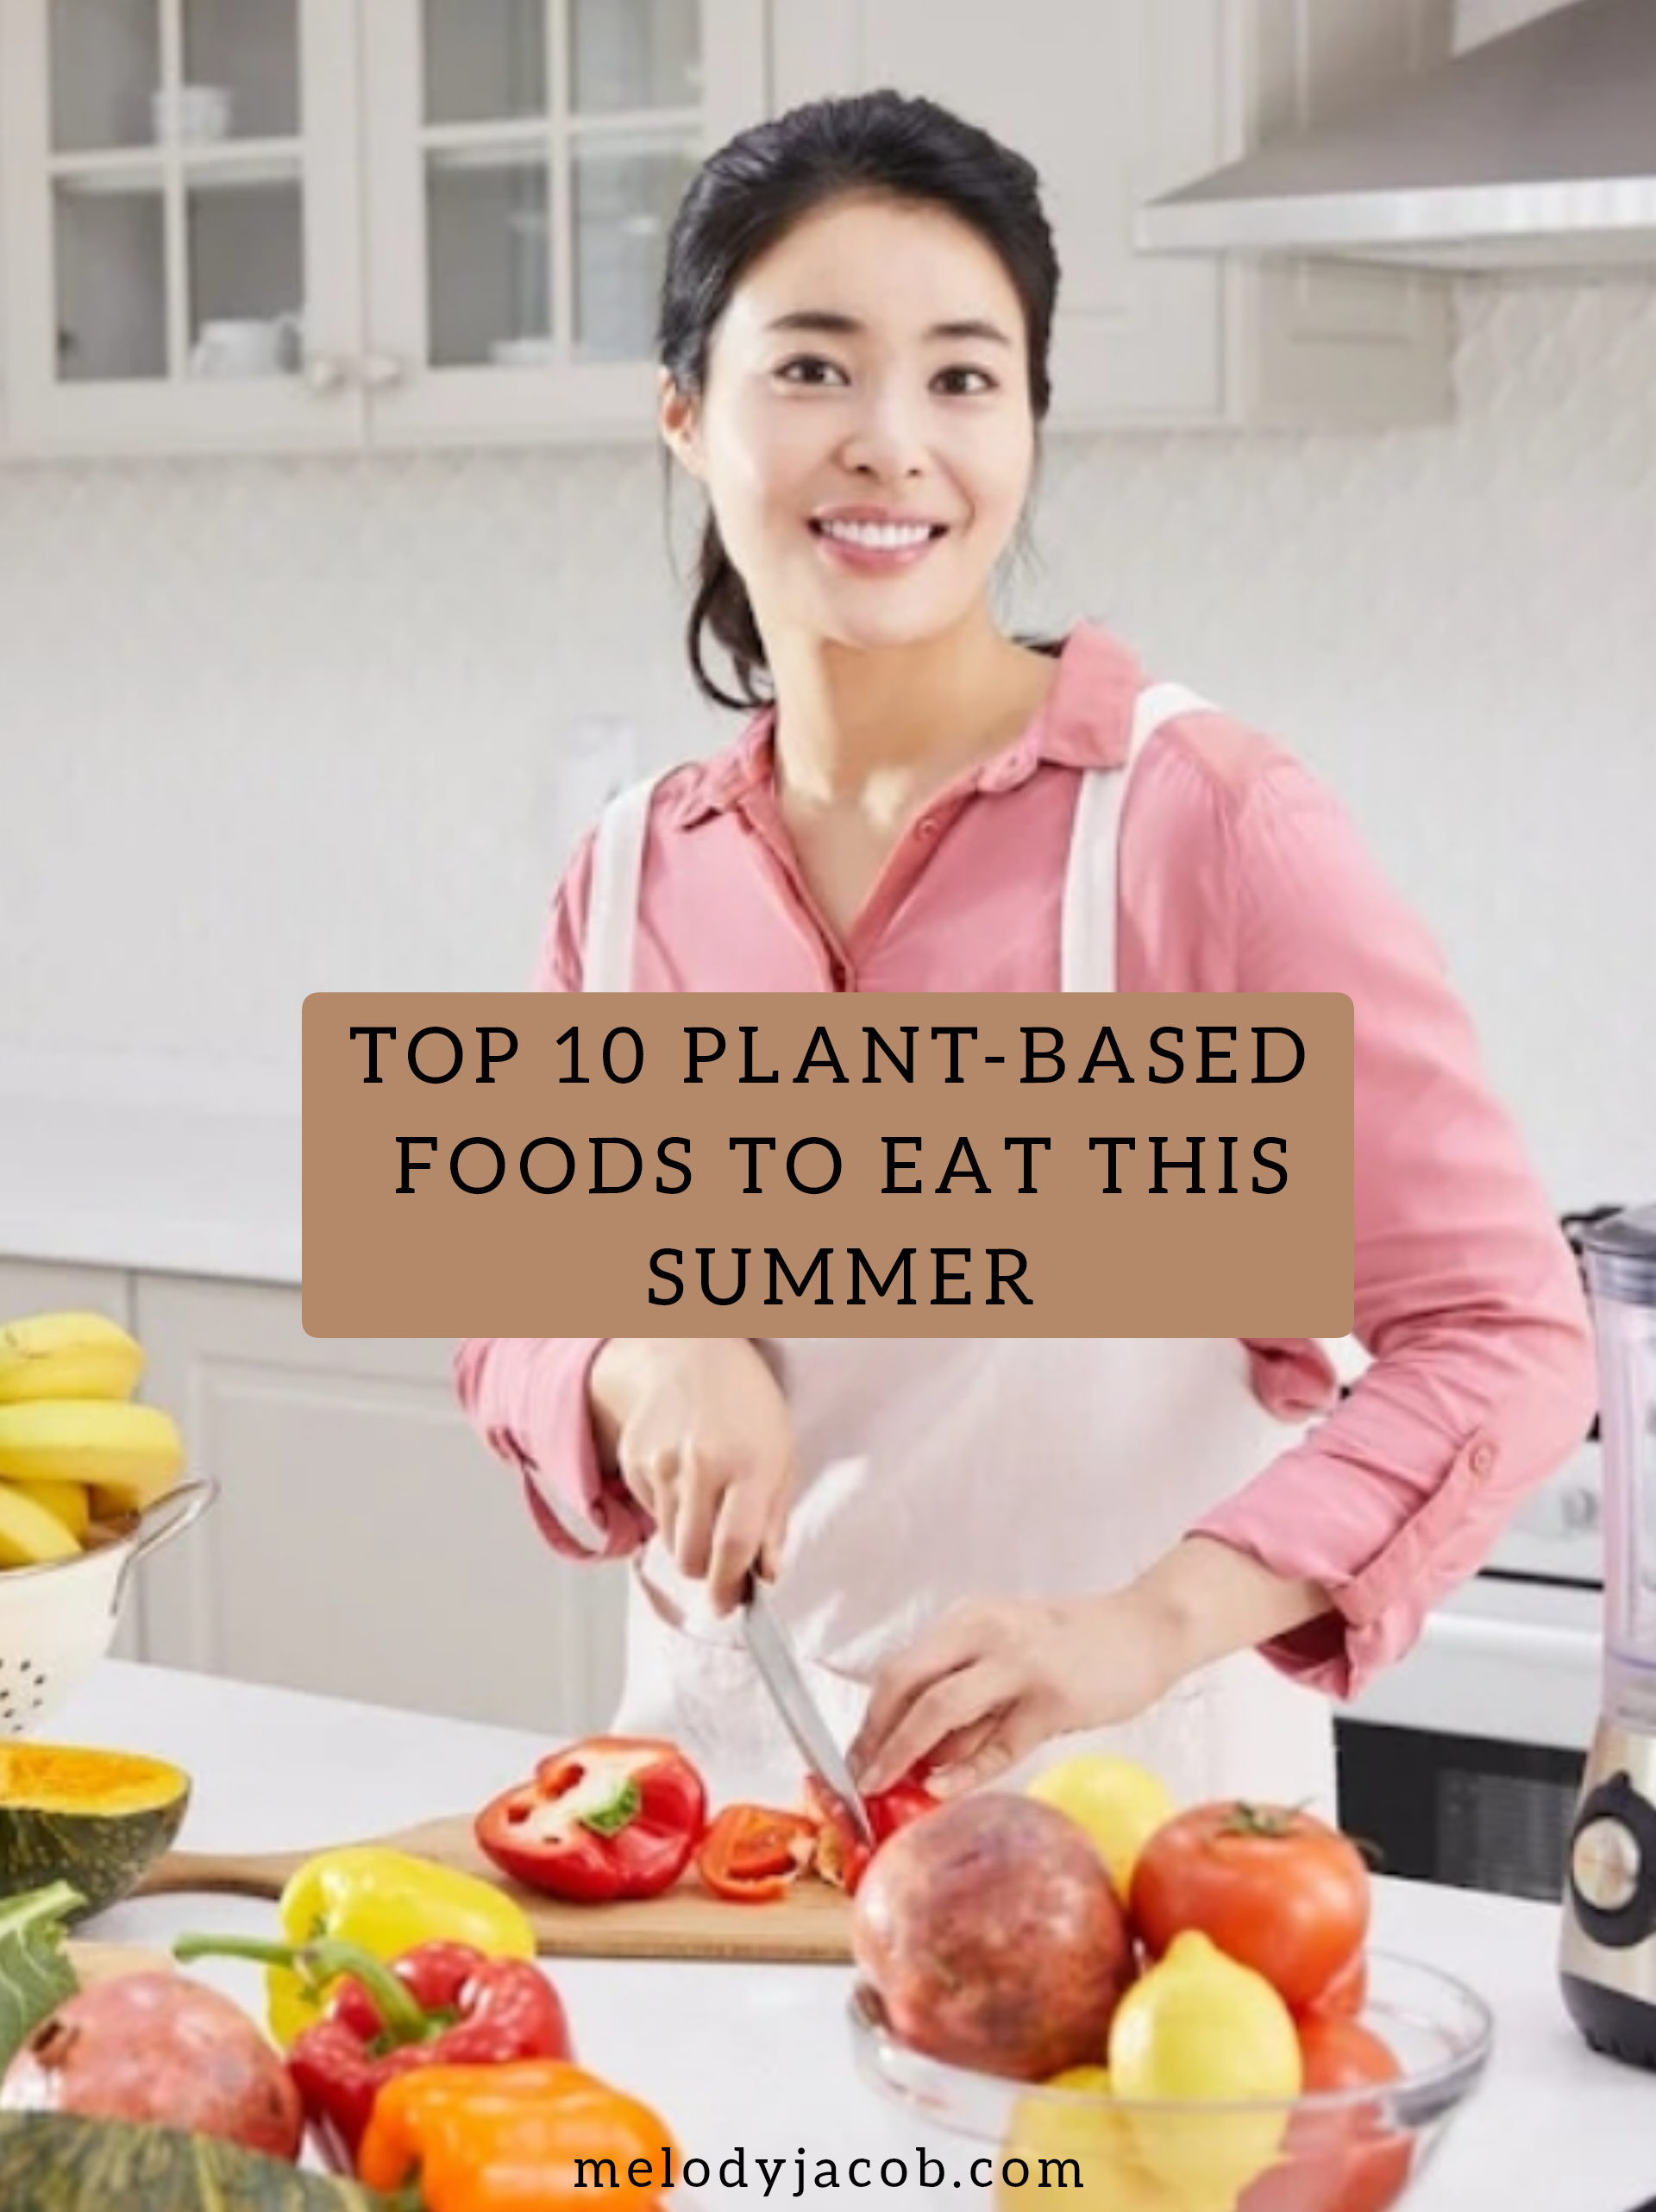 Top 10 Plant-Based Foods to Eat This Summer